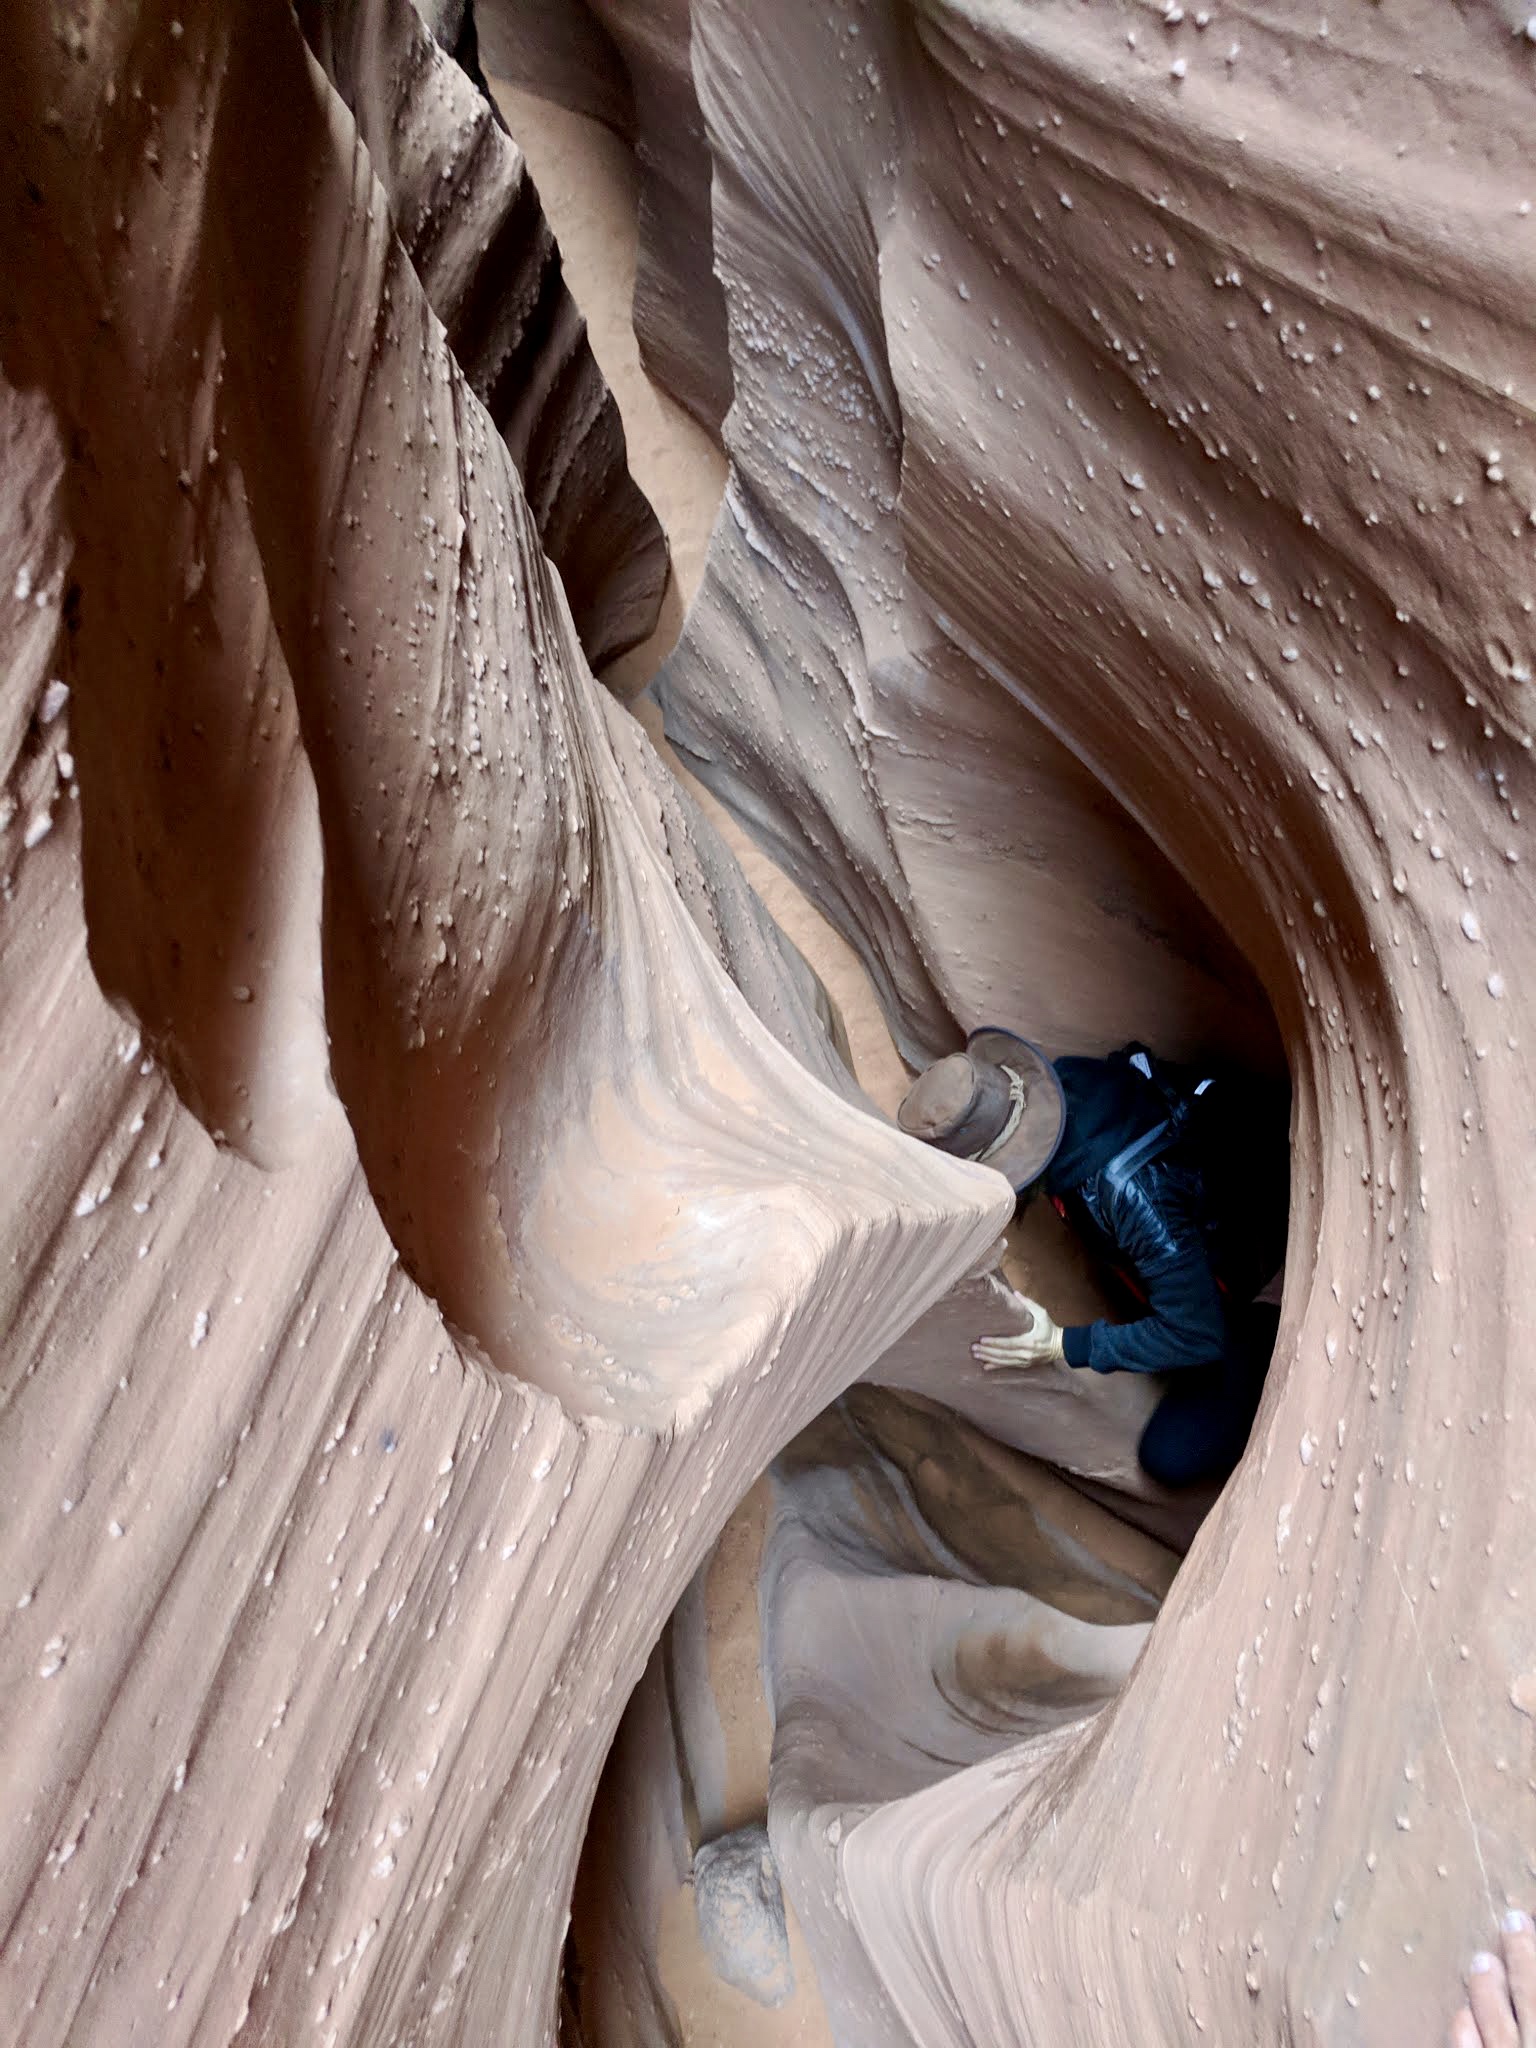 Spooky Peek A Boo Gulch Slot Canyons Escalante TravelSages